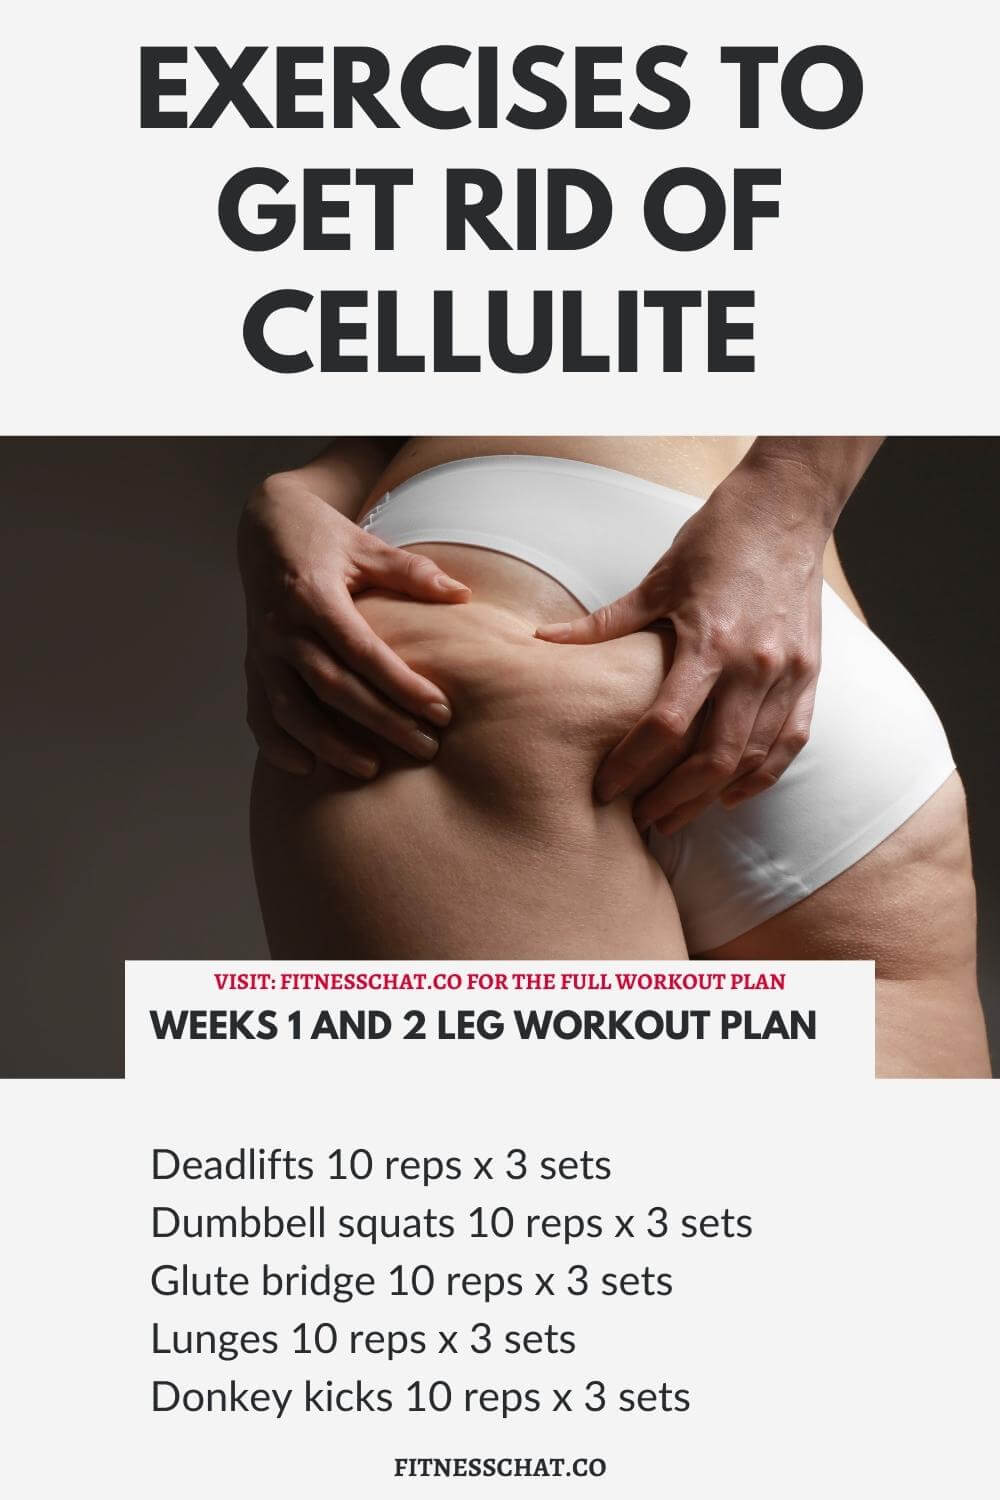 Exercises to get rid of cellulite